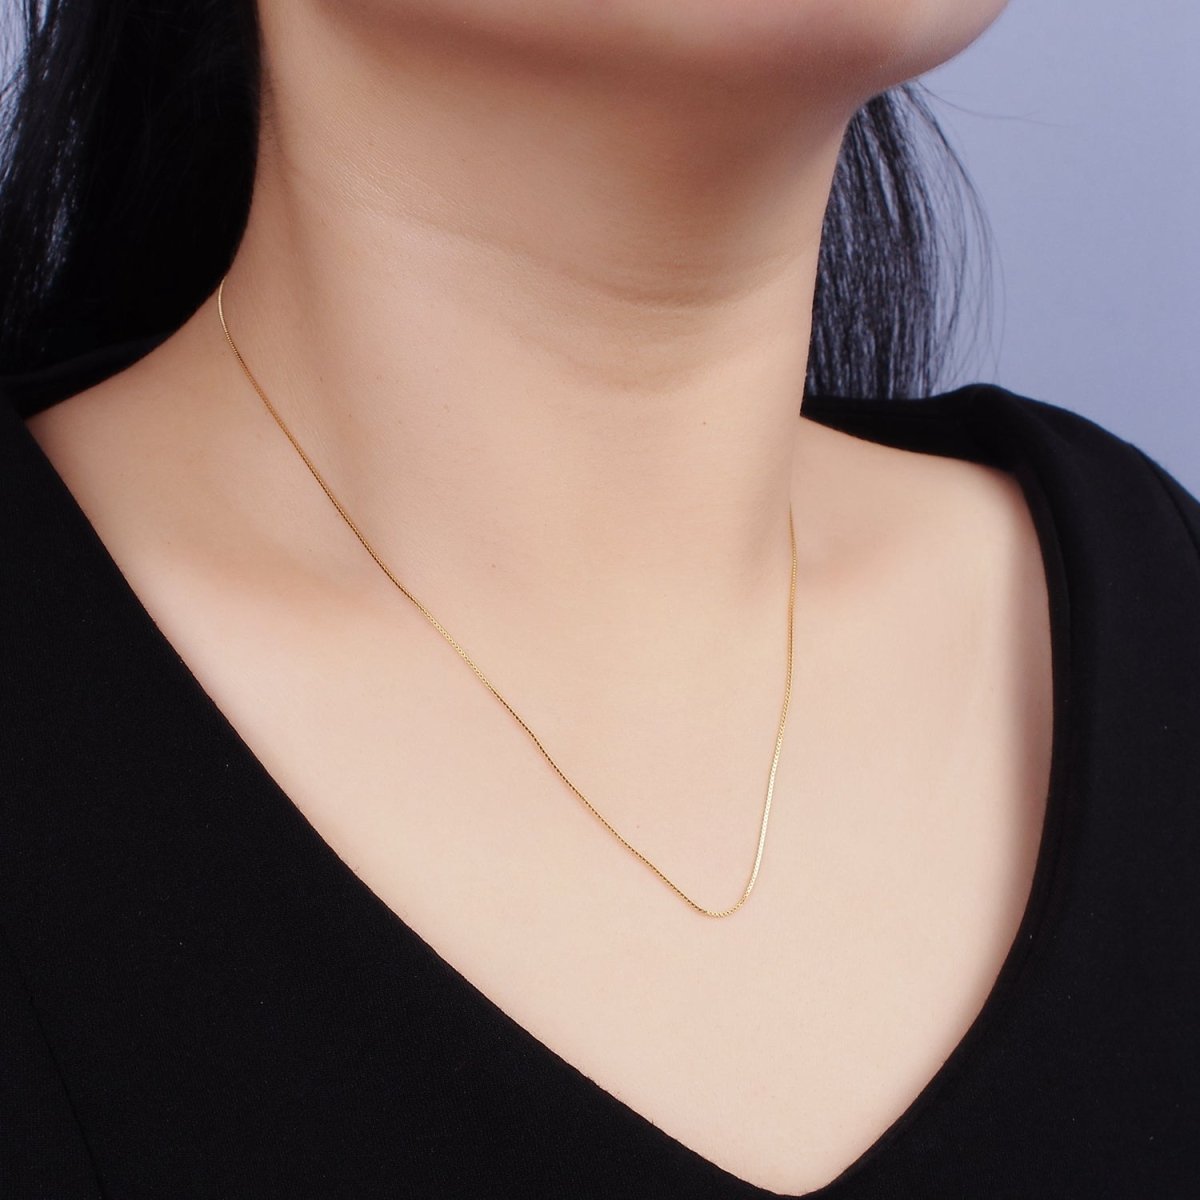 Dainty 24K Gold Vermeil Box Chain Necklace 925 Sterling Silver Necklace Chain w/ Heavy 24K Gold Plated 18 inch | WA-1960 Clearance Pricing - DLUXCA